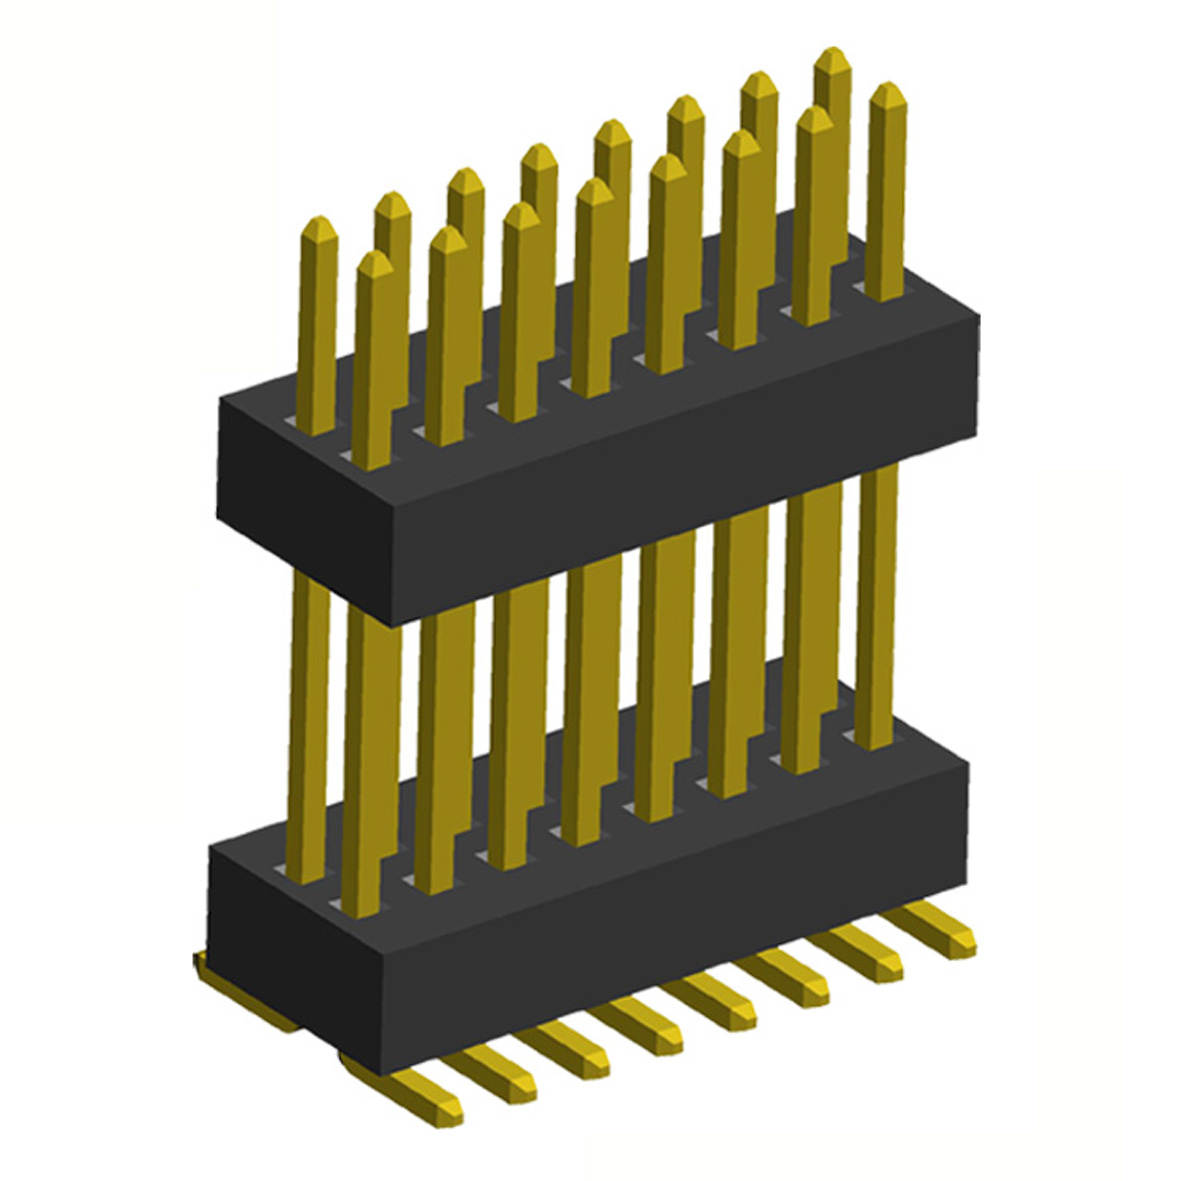 2191SMDI-XXXG series, open double row elevated straight pin headers on PCB for surface mounting (SMD), pitch 1.00 mm, 2x50 pins